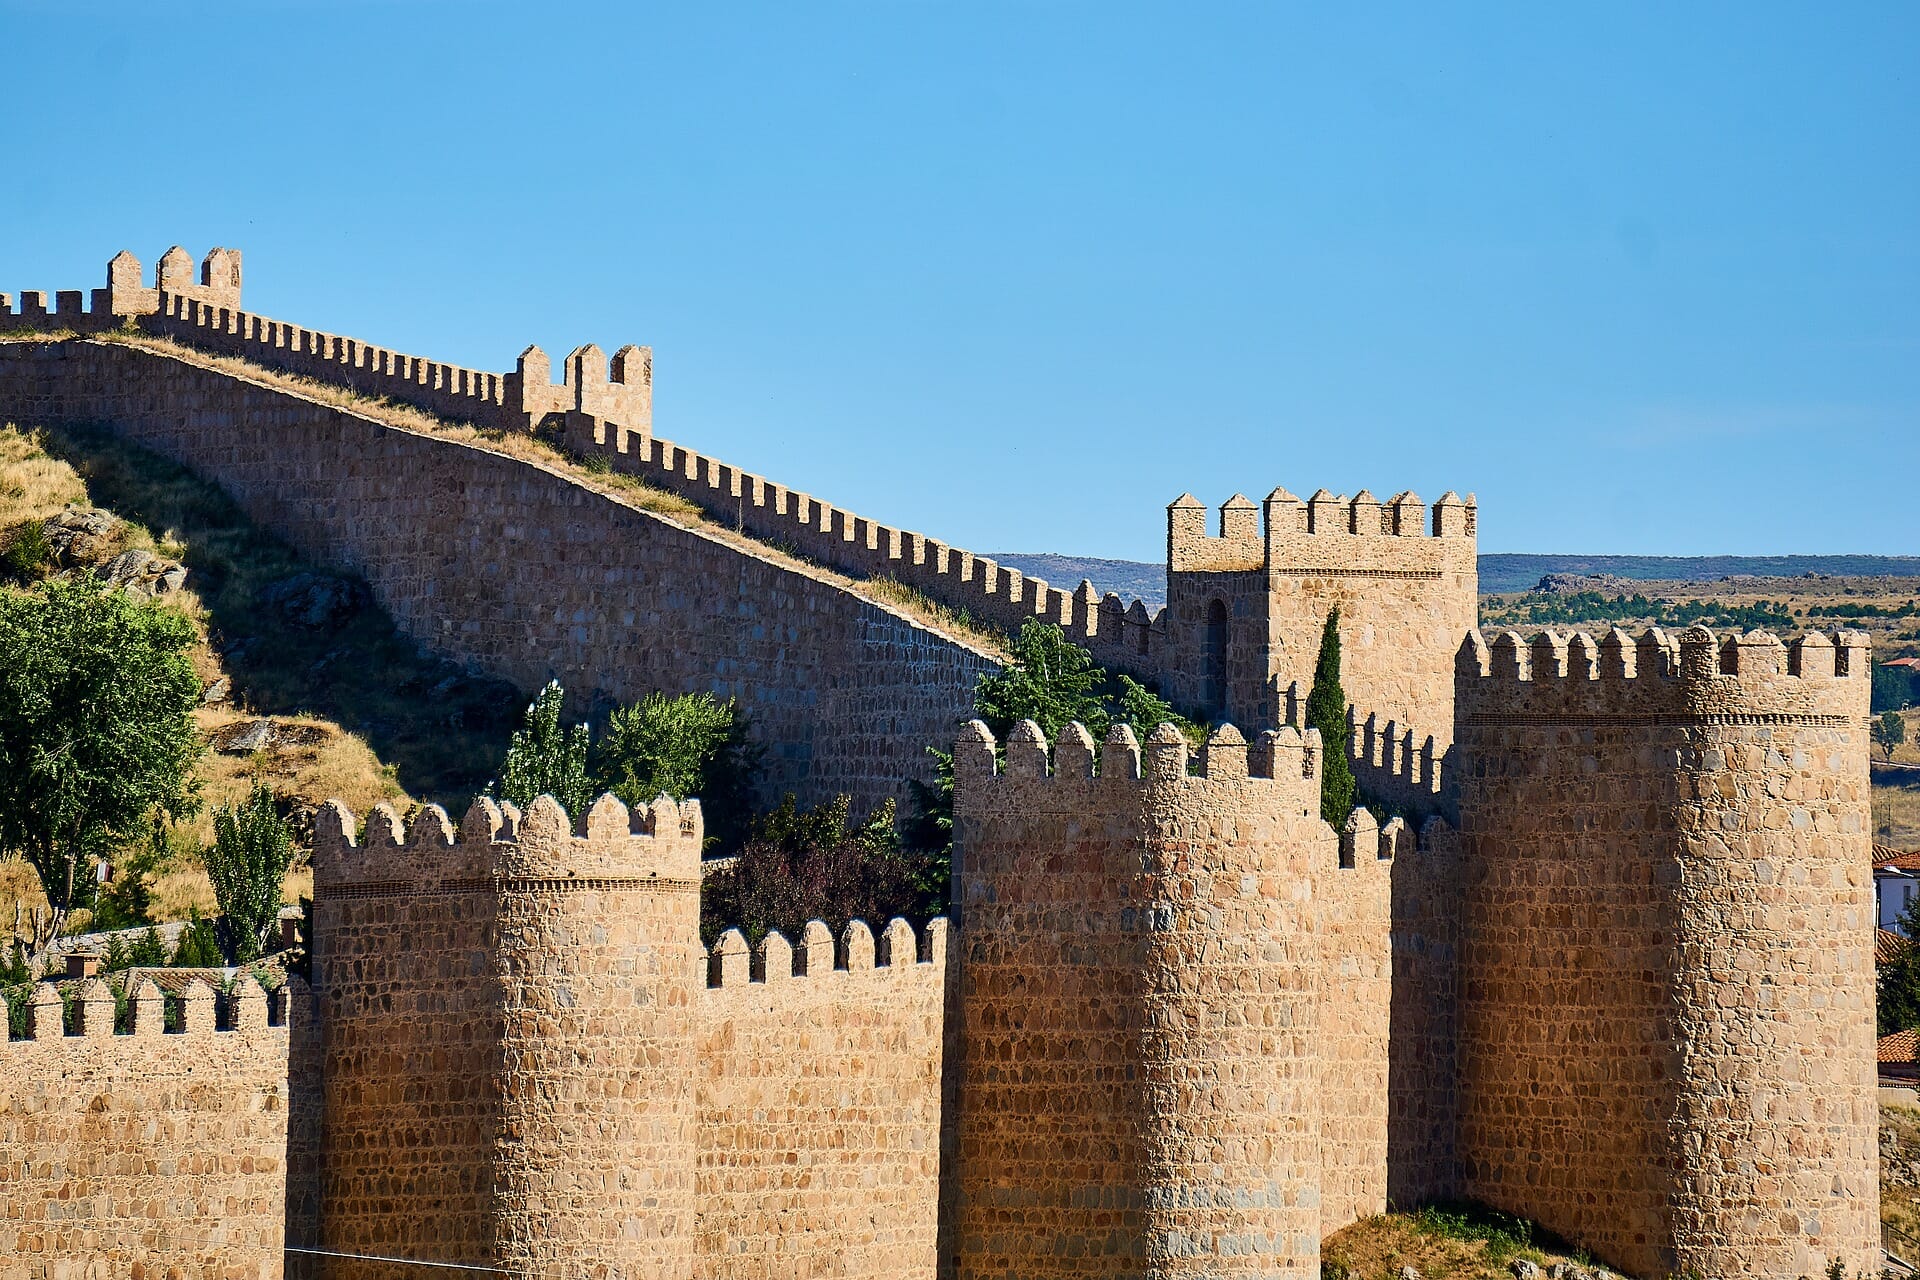 Towering Avila wall on this sunny day